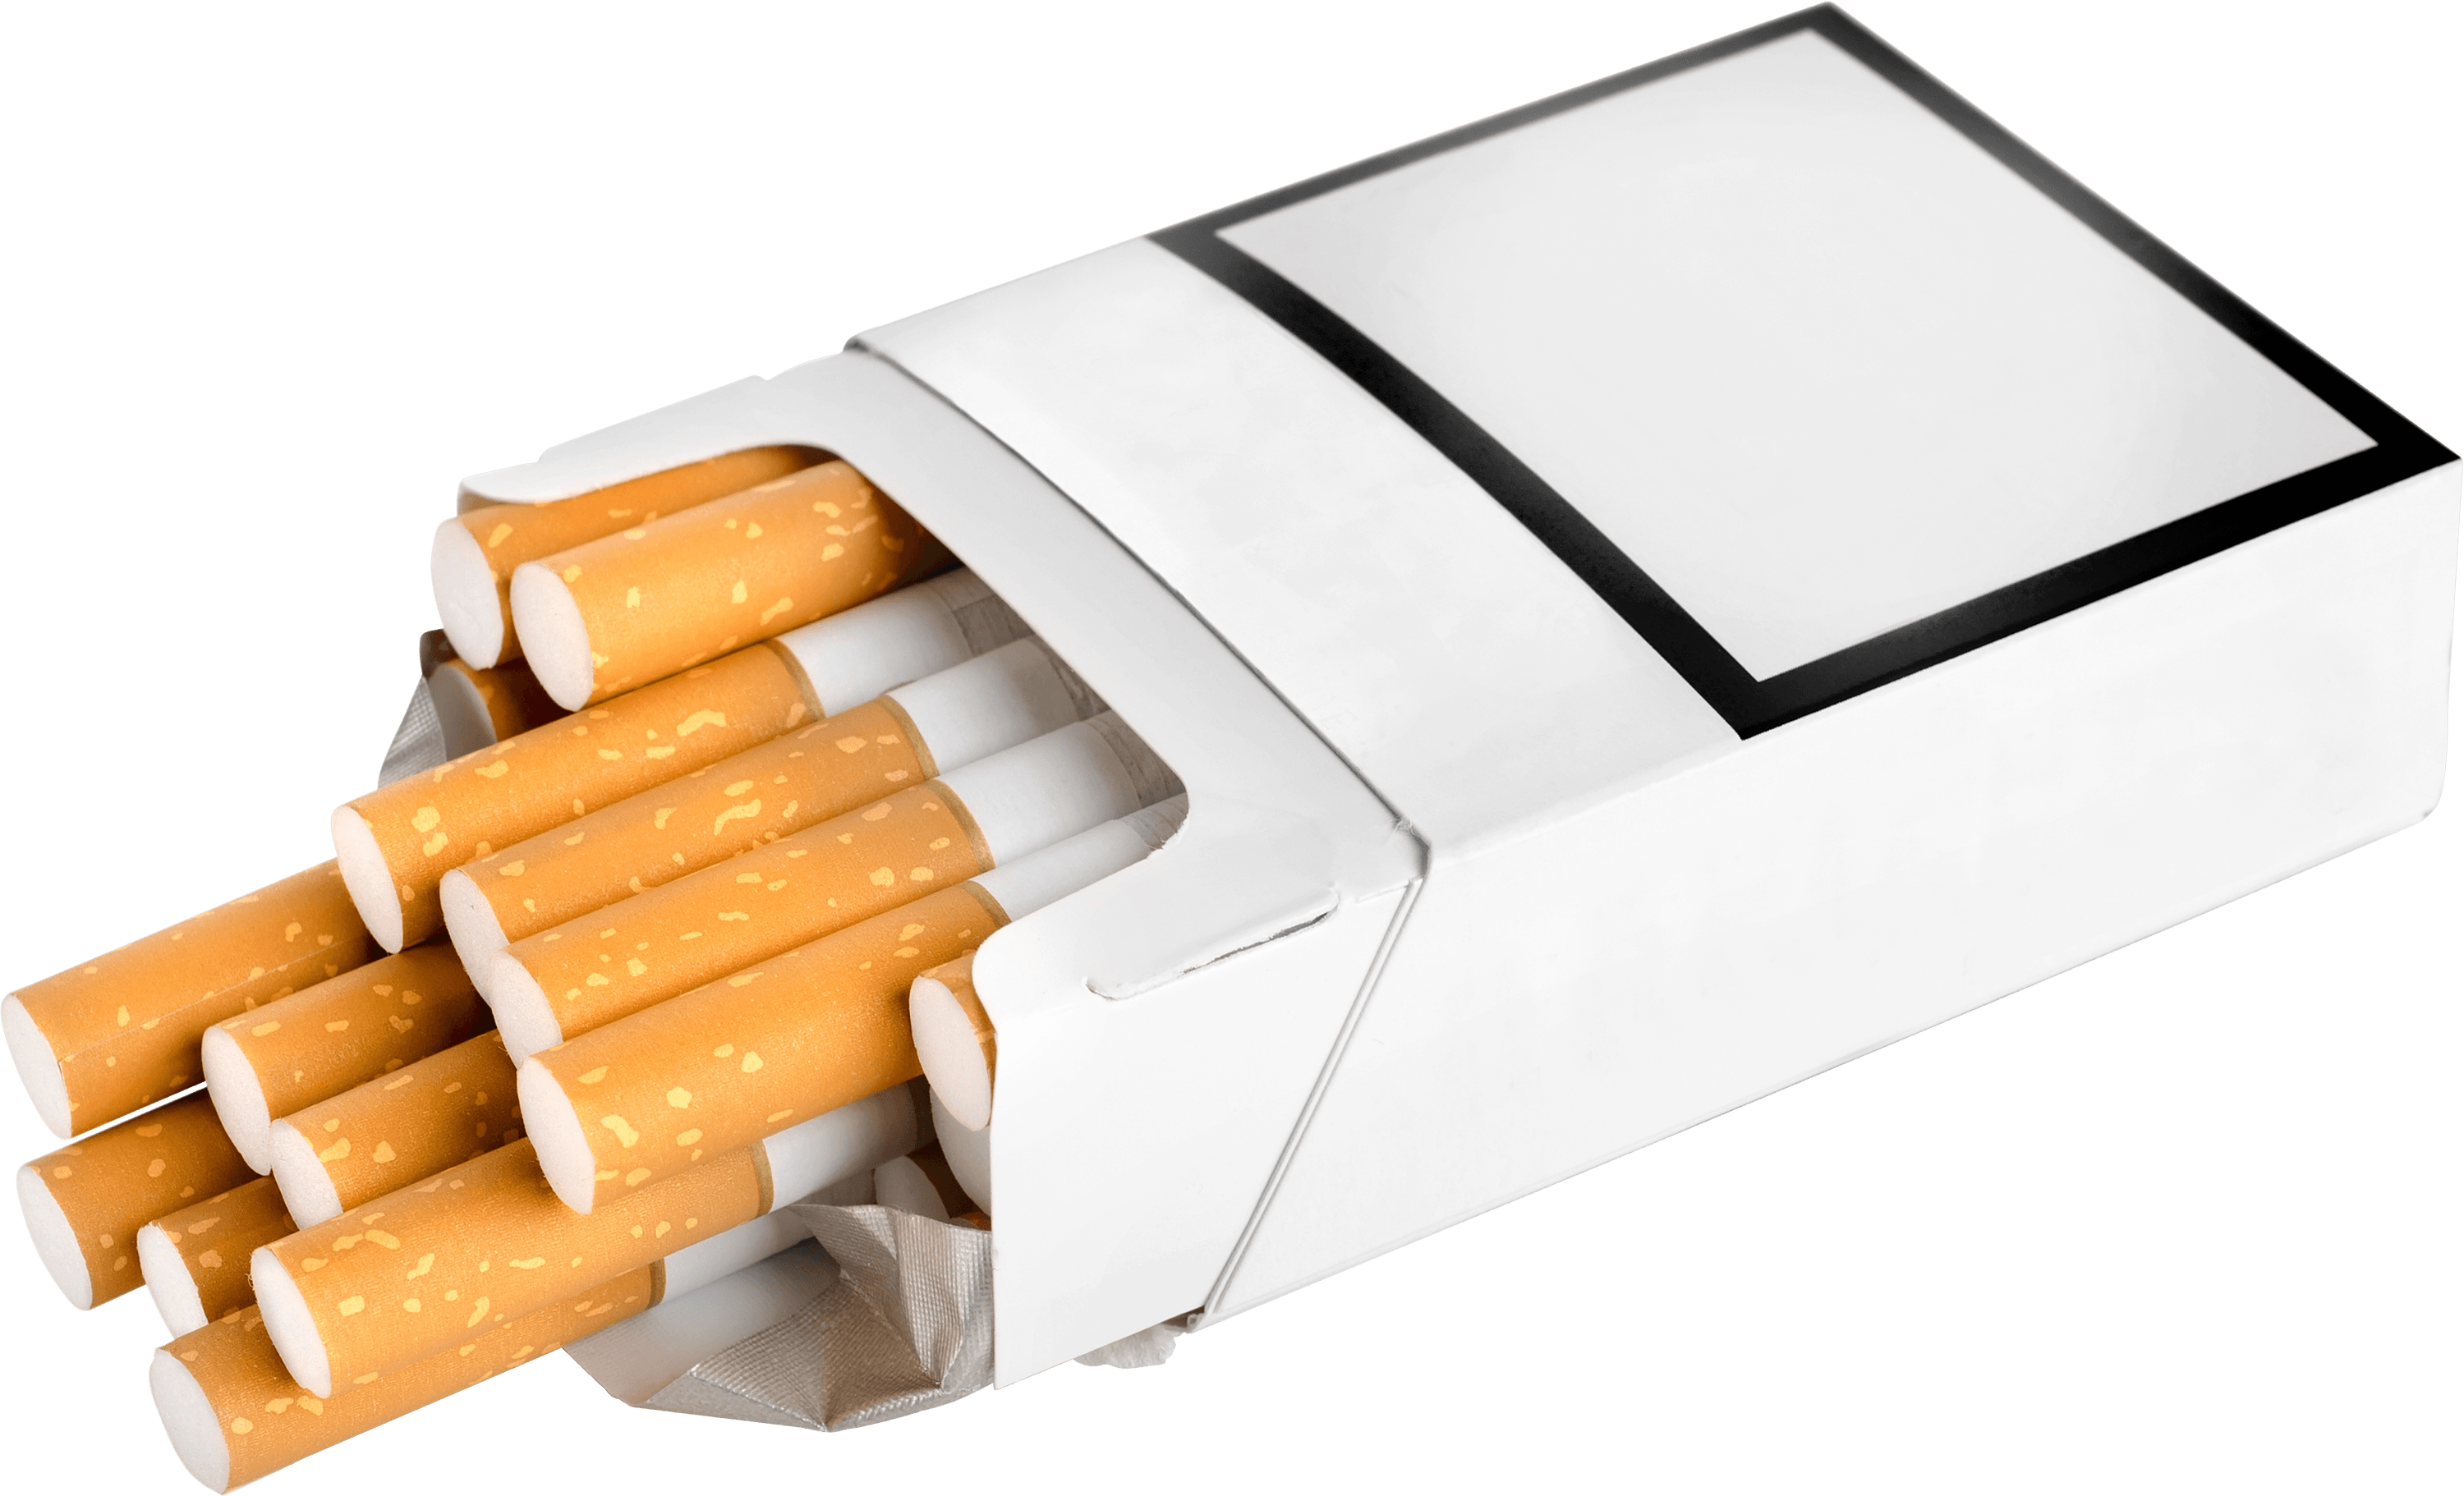 Pack Of Cigarettes - Cigarette Pack, Transparent background PNG HD thumbnail